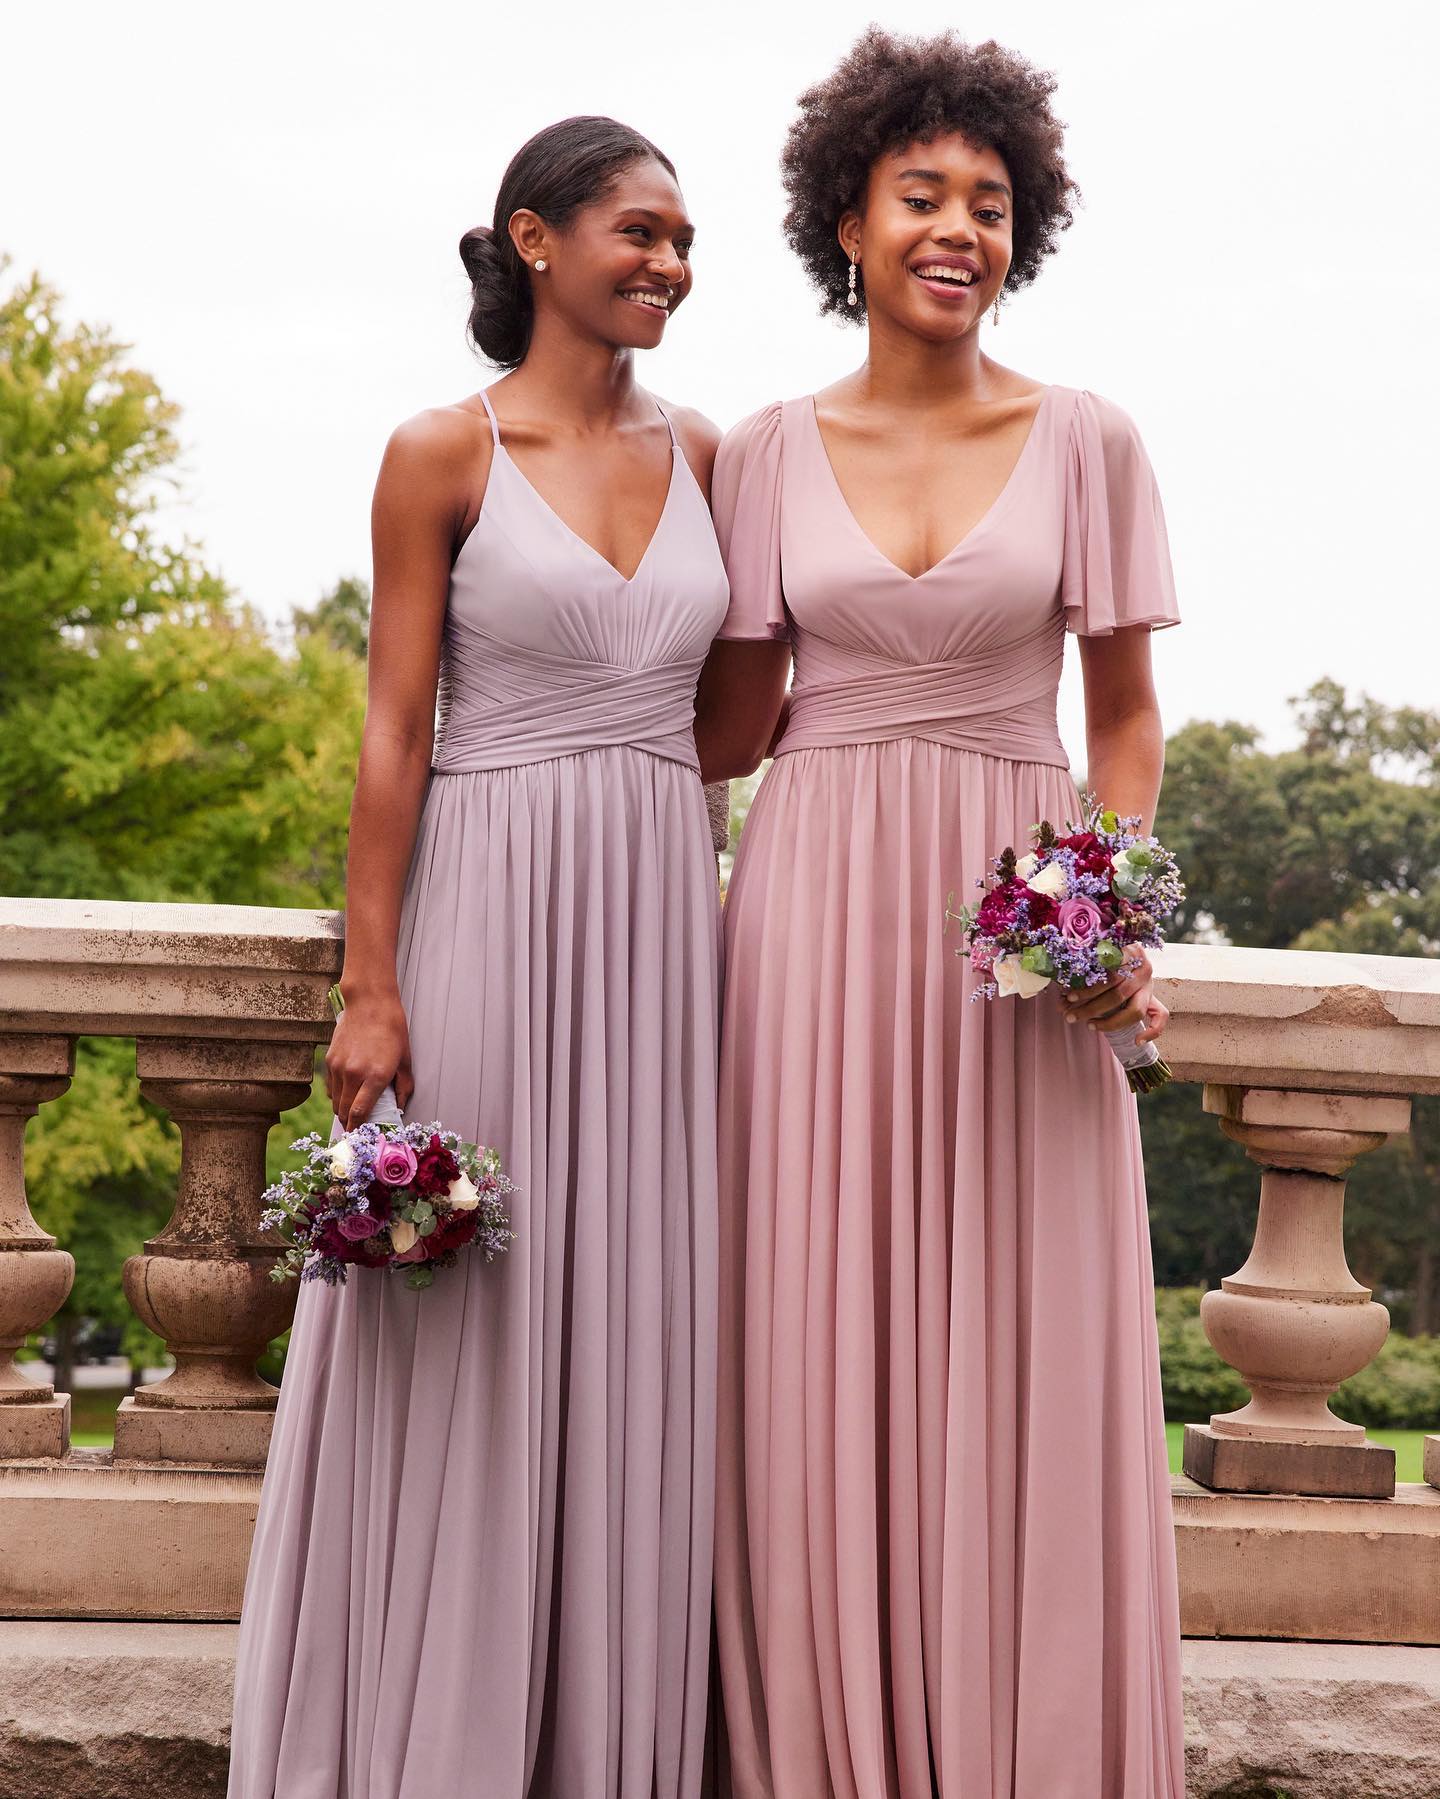 Tips for Making Your Maid of Honor Stand Out